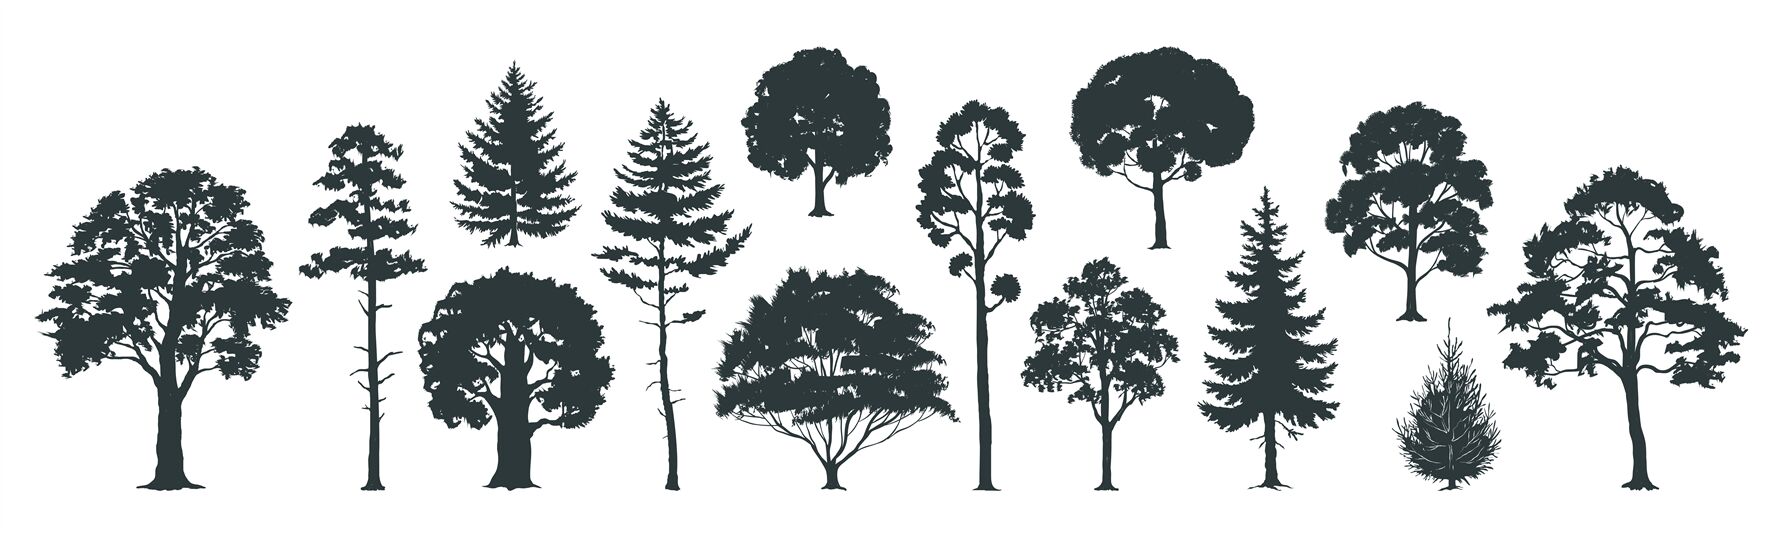 Trees Silhouettes Forest And Park Pines Firs And Spruces Coniferous By Spicytruffel Thehungryjpeg Com